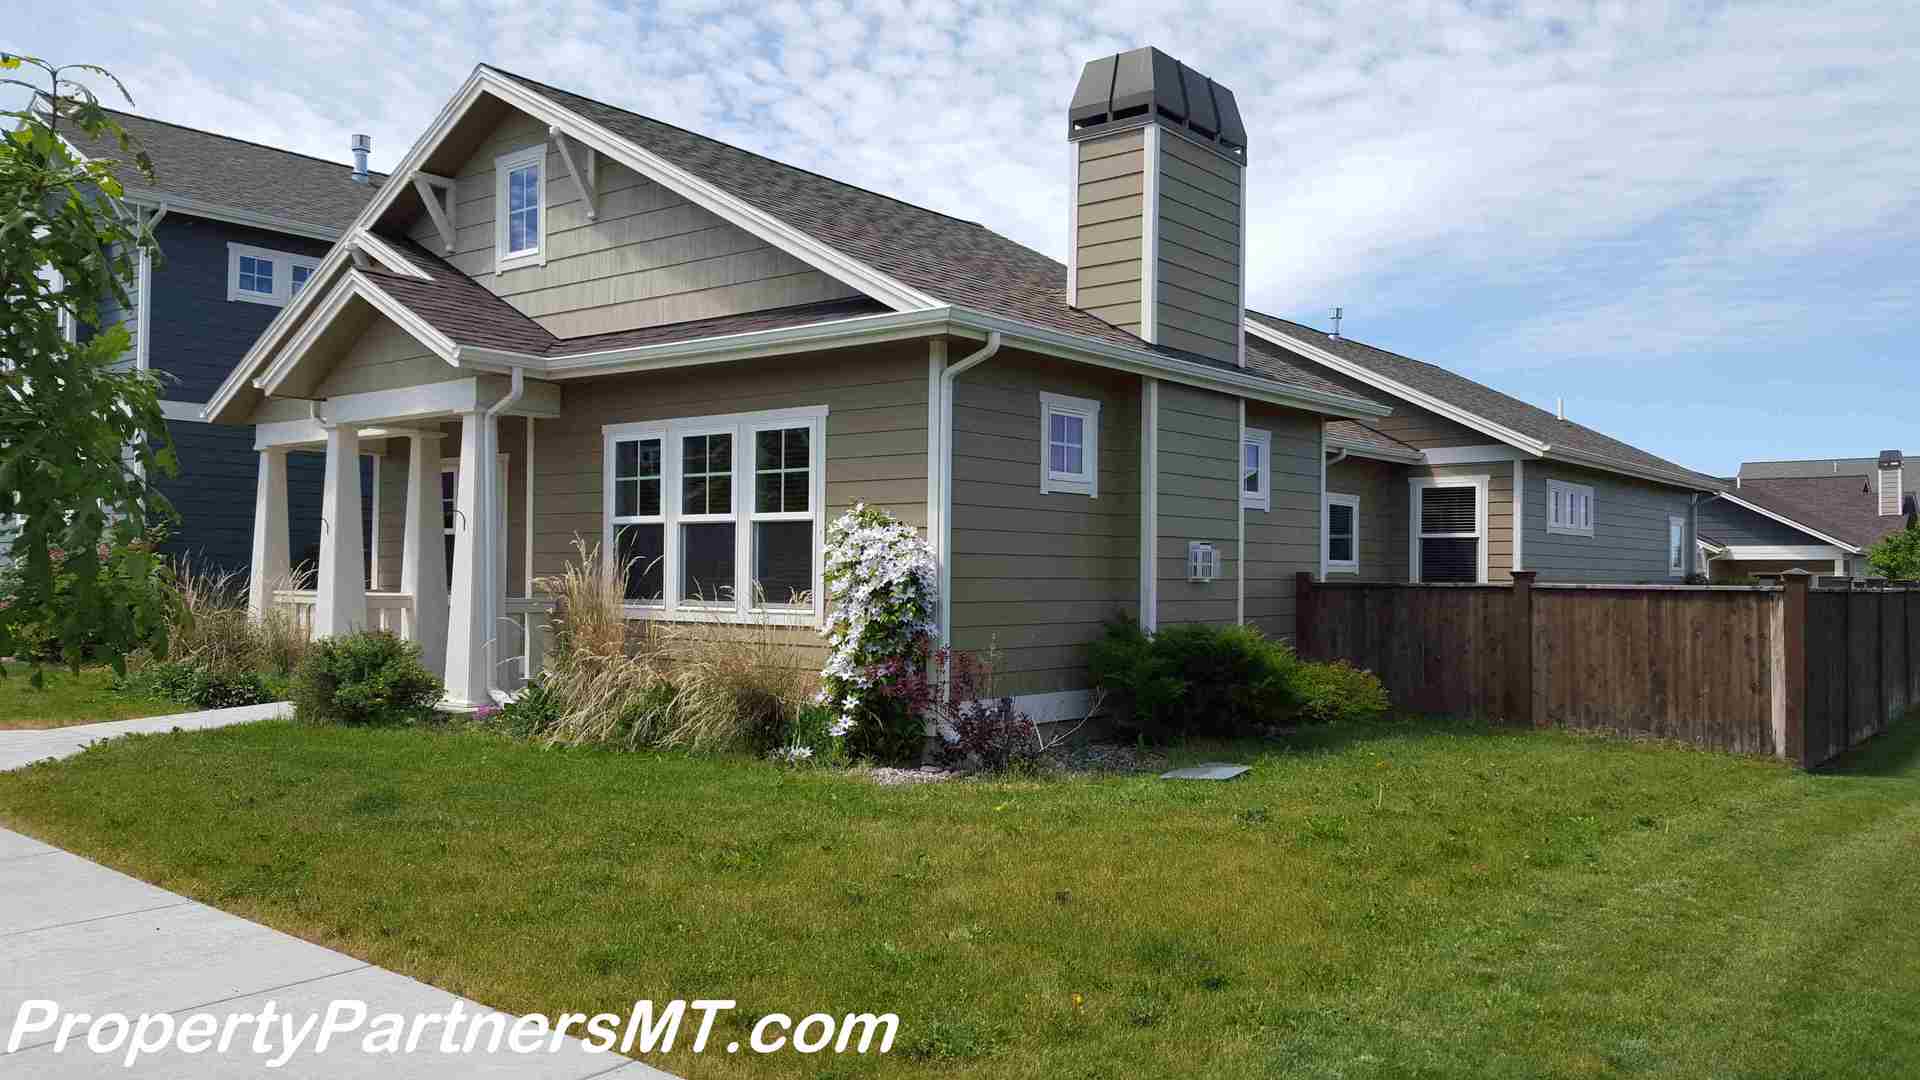 *** Beautiful *** 3 Bed 2 Bath house in Alder Creek - Short term option may be available.